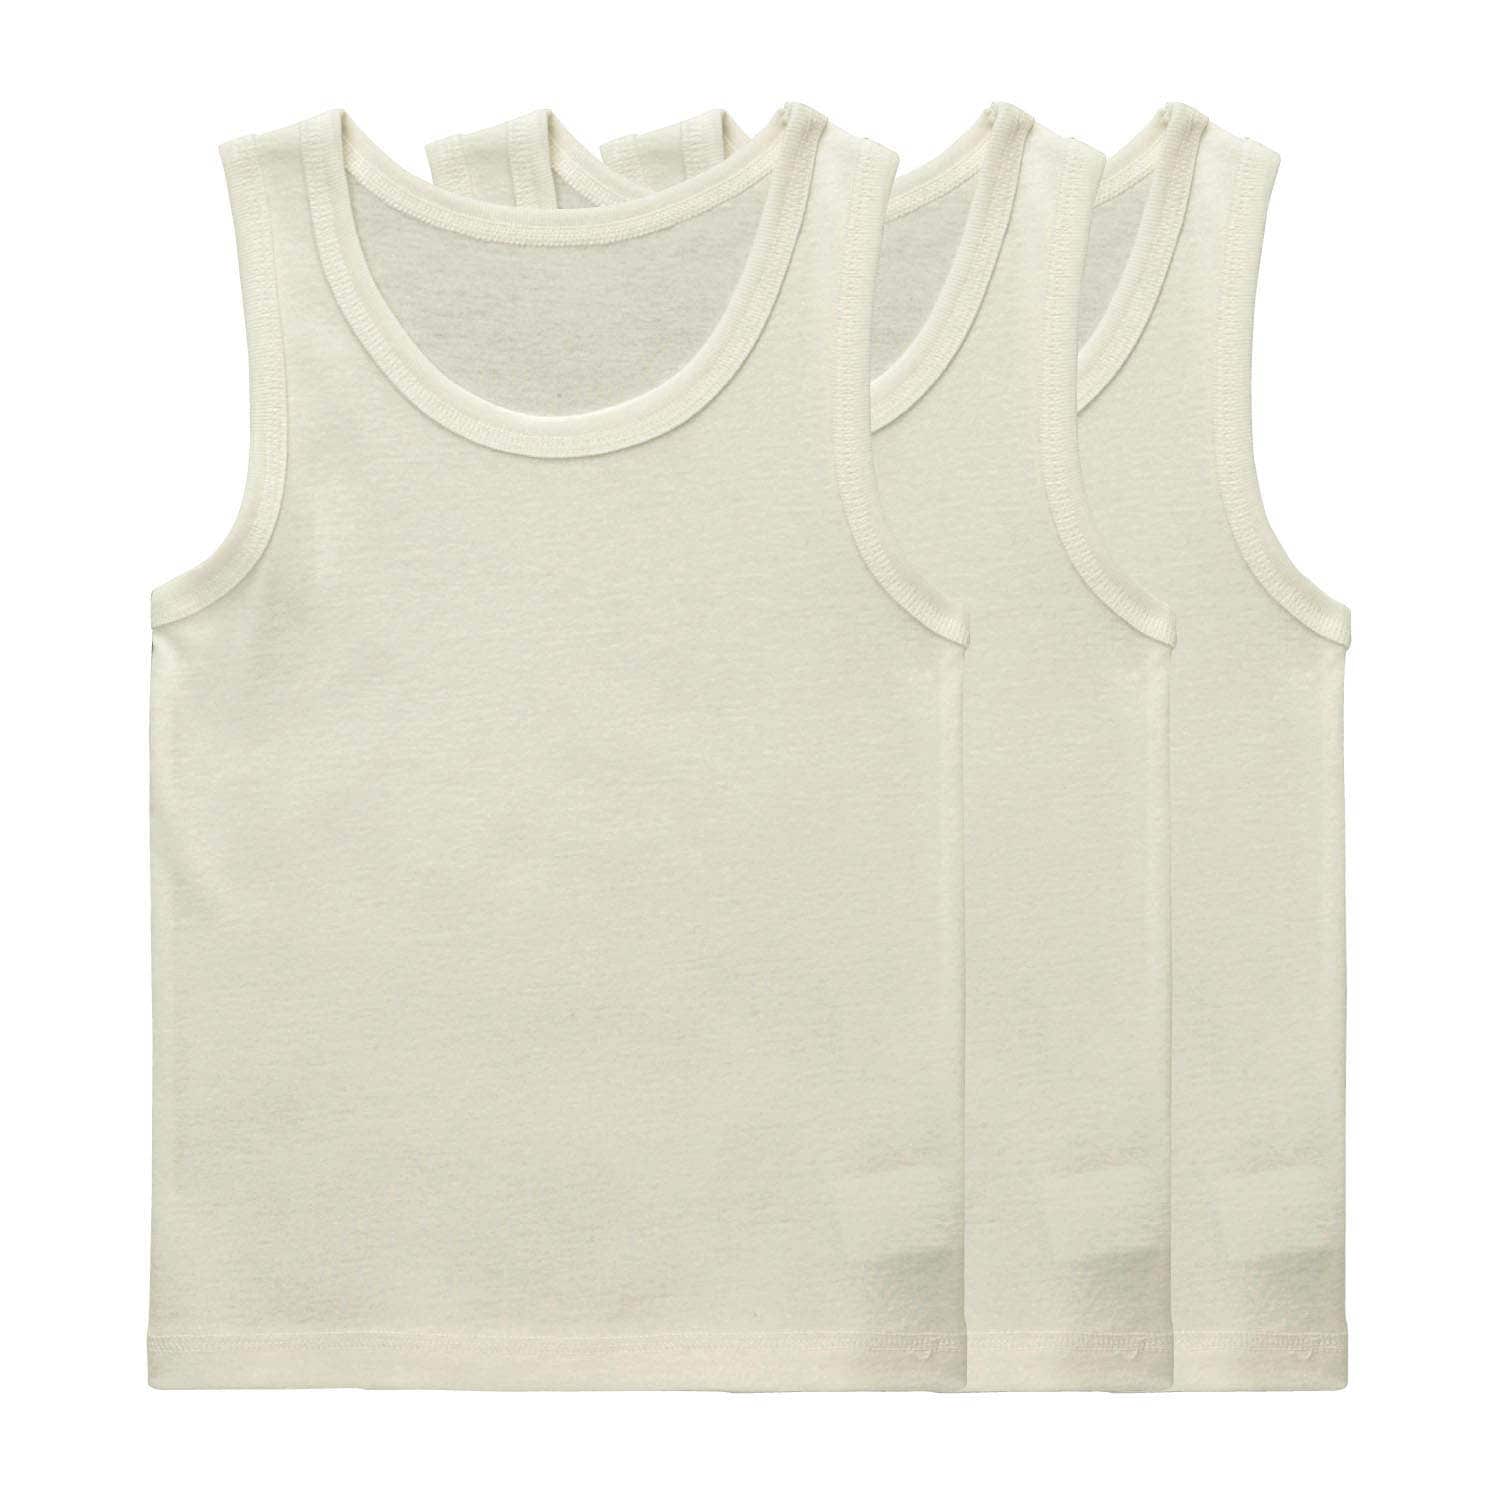 White Unisex Baby and Toddler Soft Cotton Tee Boys and Girls T Shirt Baby Jay Short Sleeved Undershirt 5 Pack 